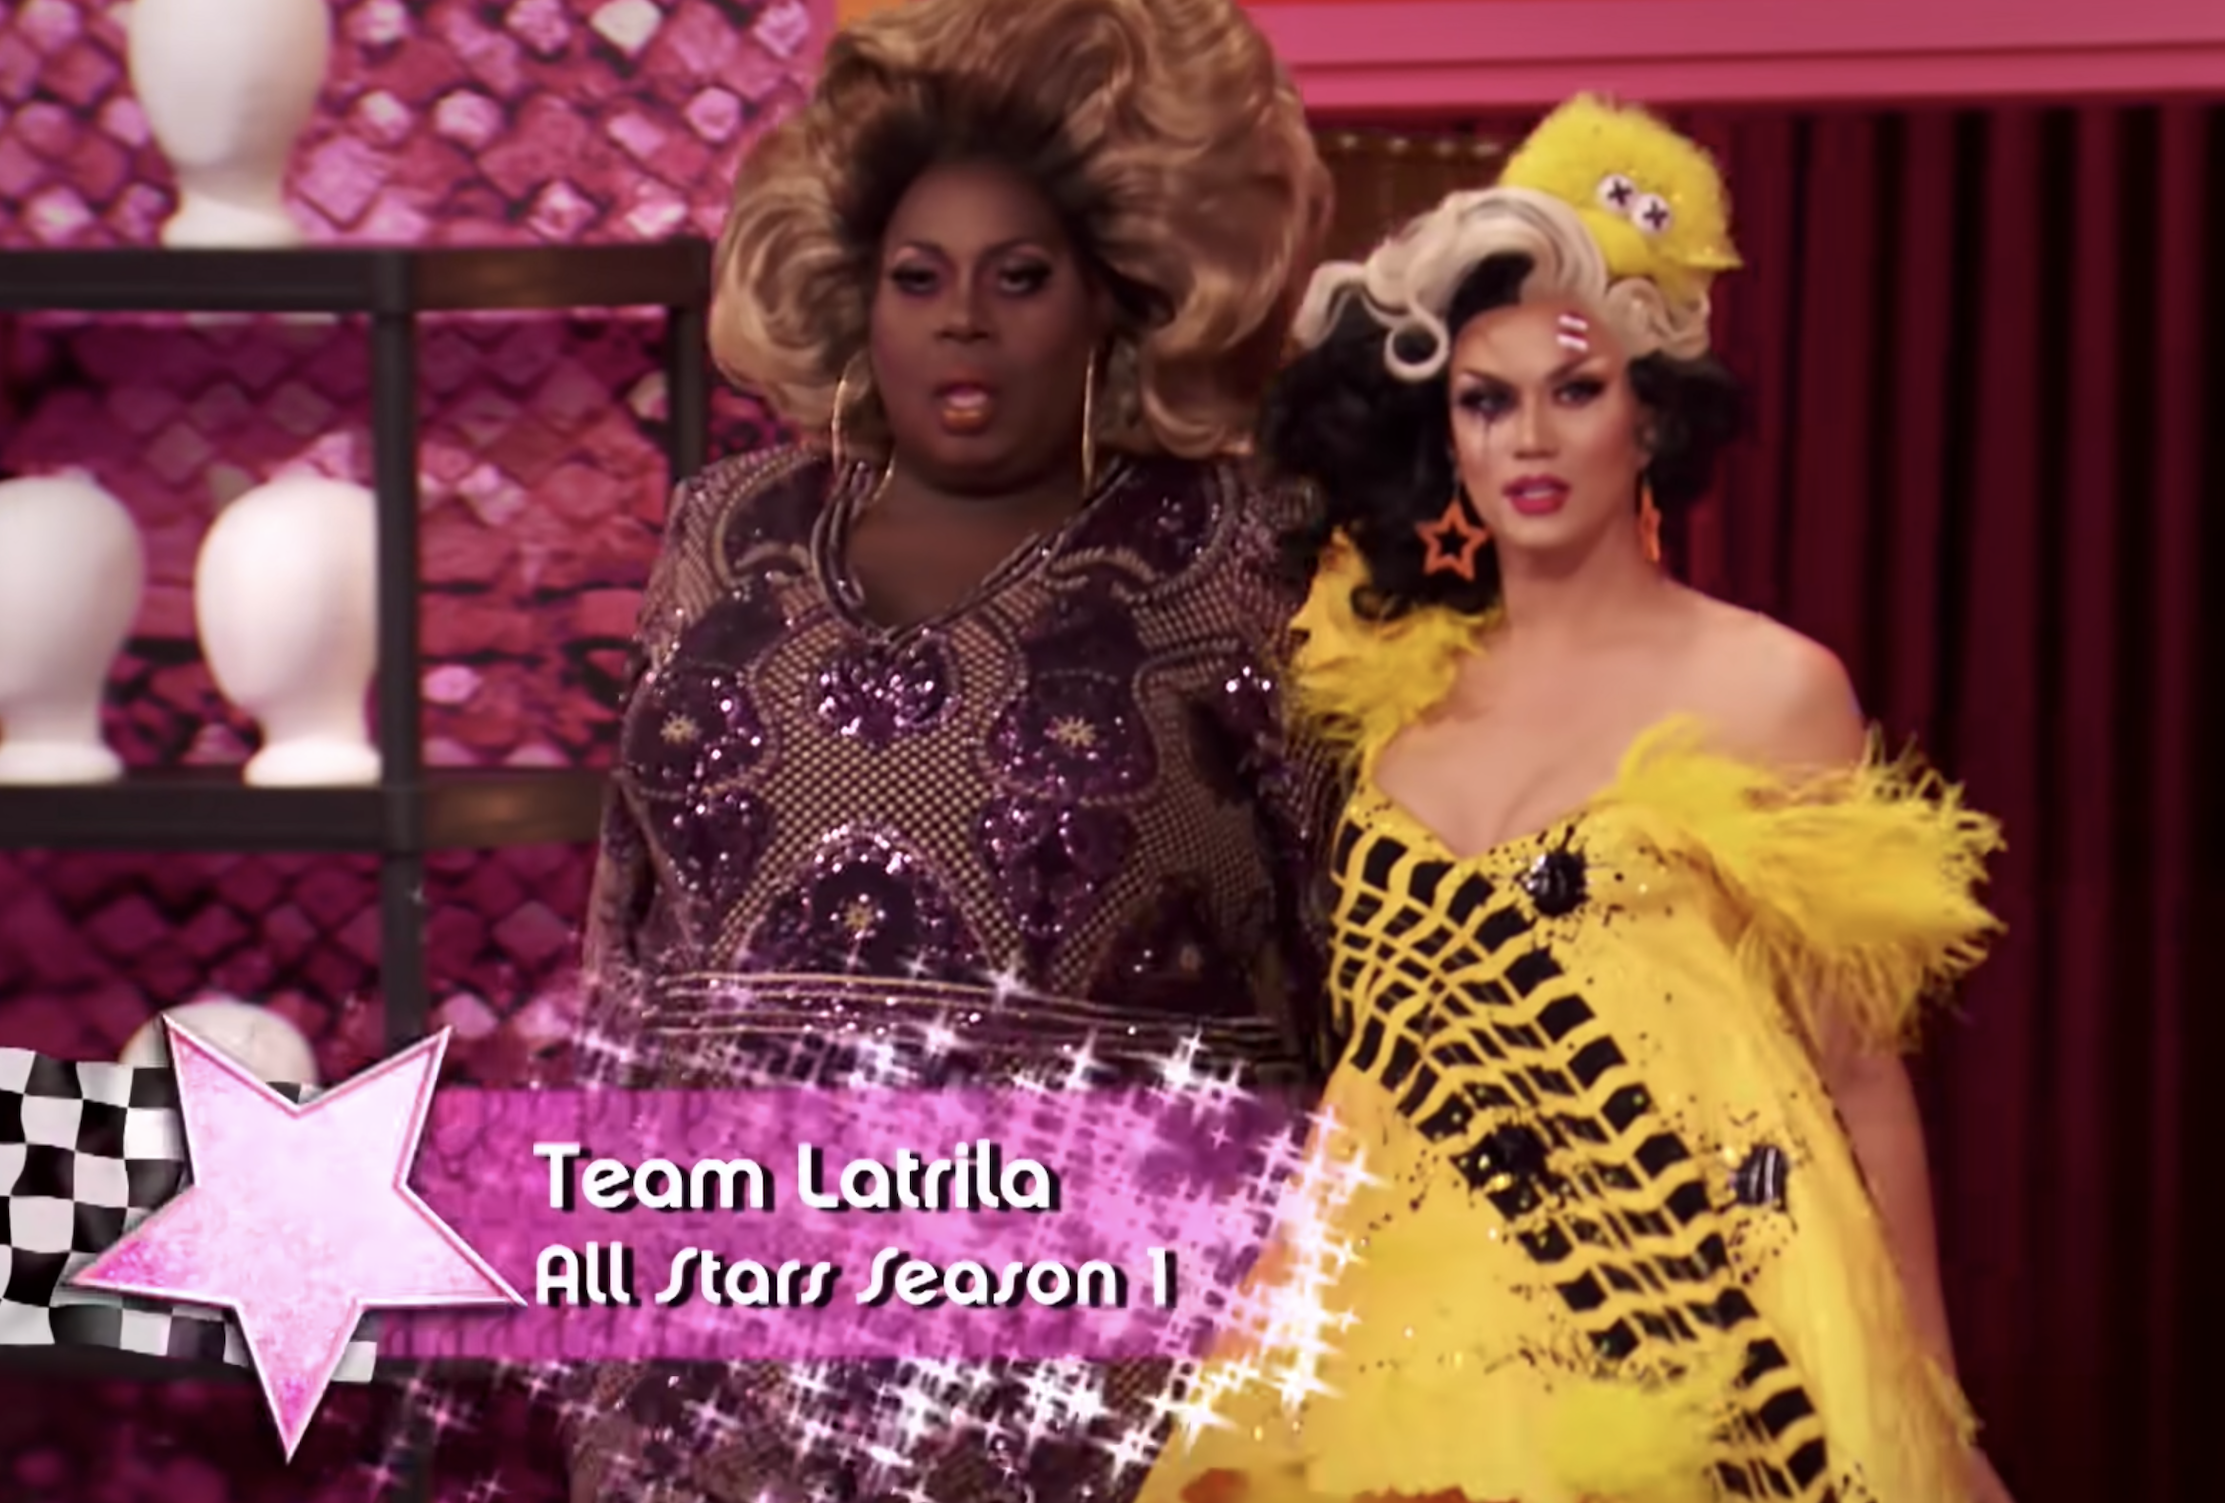 Latrice Royale and Manila Luzon entering the Werk Room